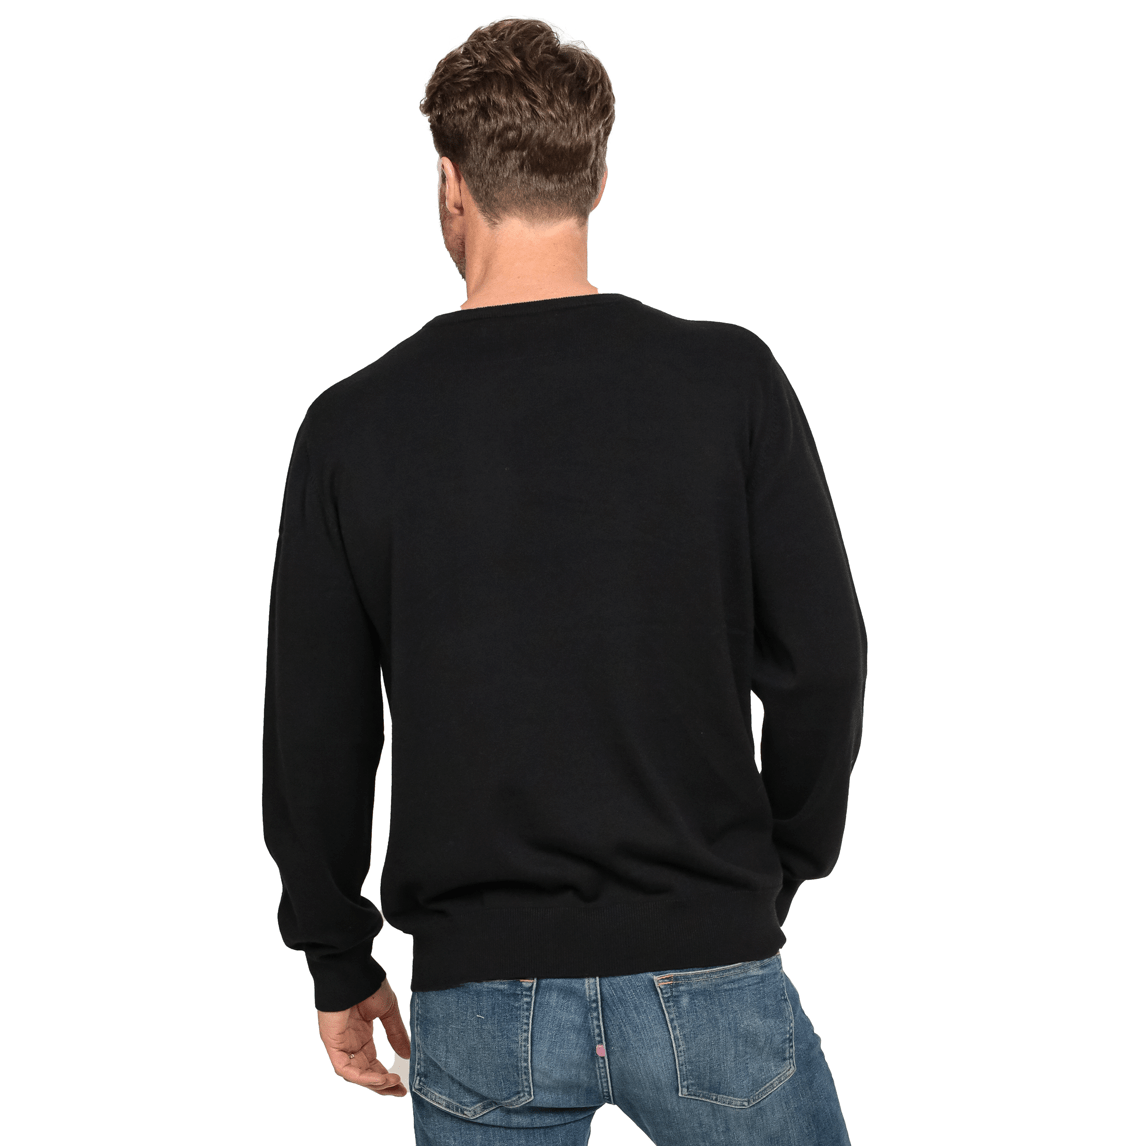 The back view of a man wearing a Guinness 100% Organic Cotton Jumper.